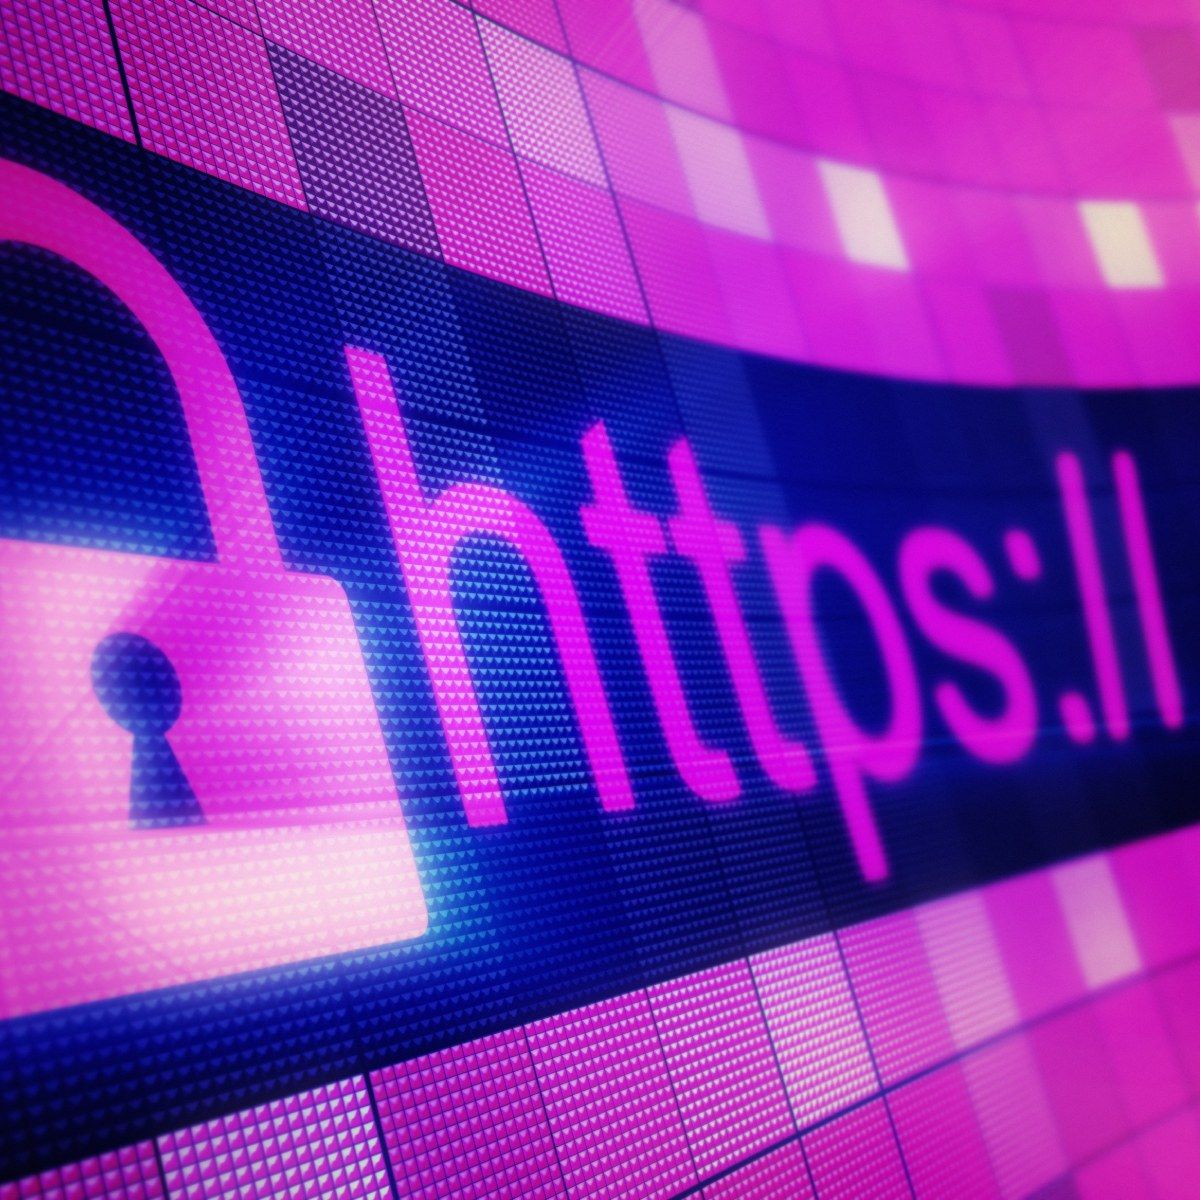 A close-up of a web browser URL bar showing a lock symbol and HTTPS:// on an abstract pink and purple background